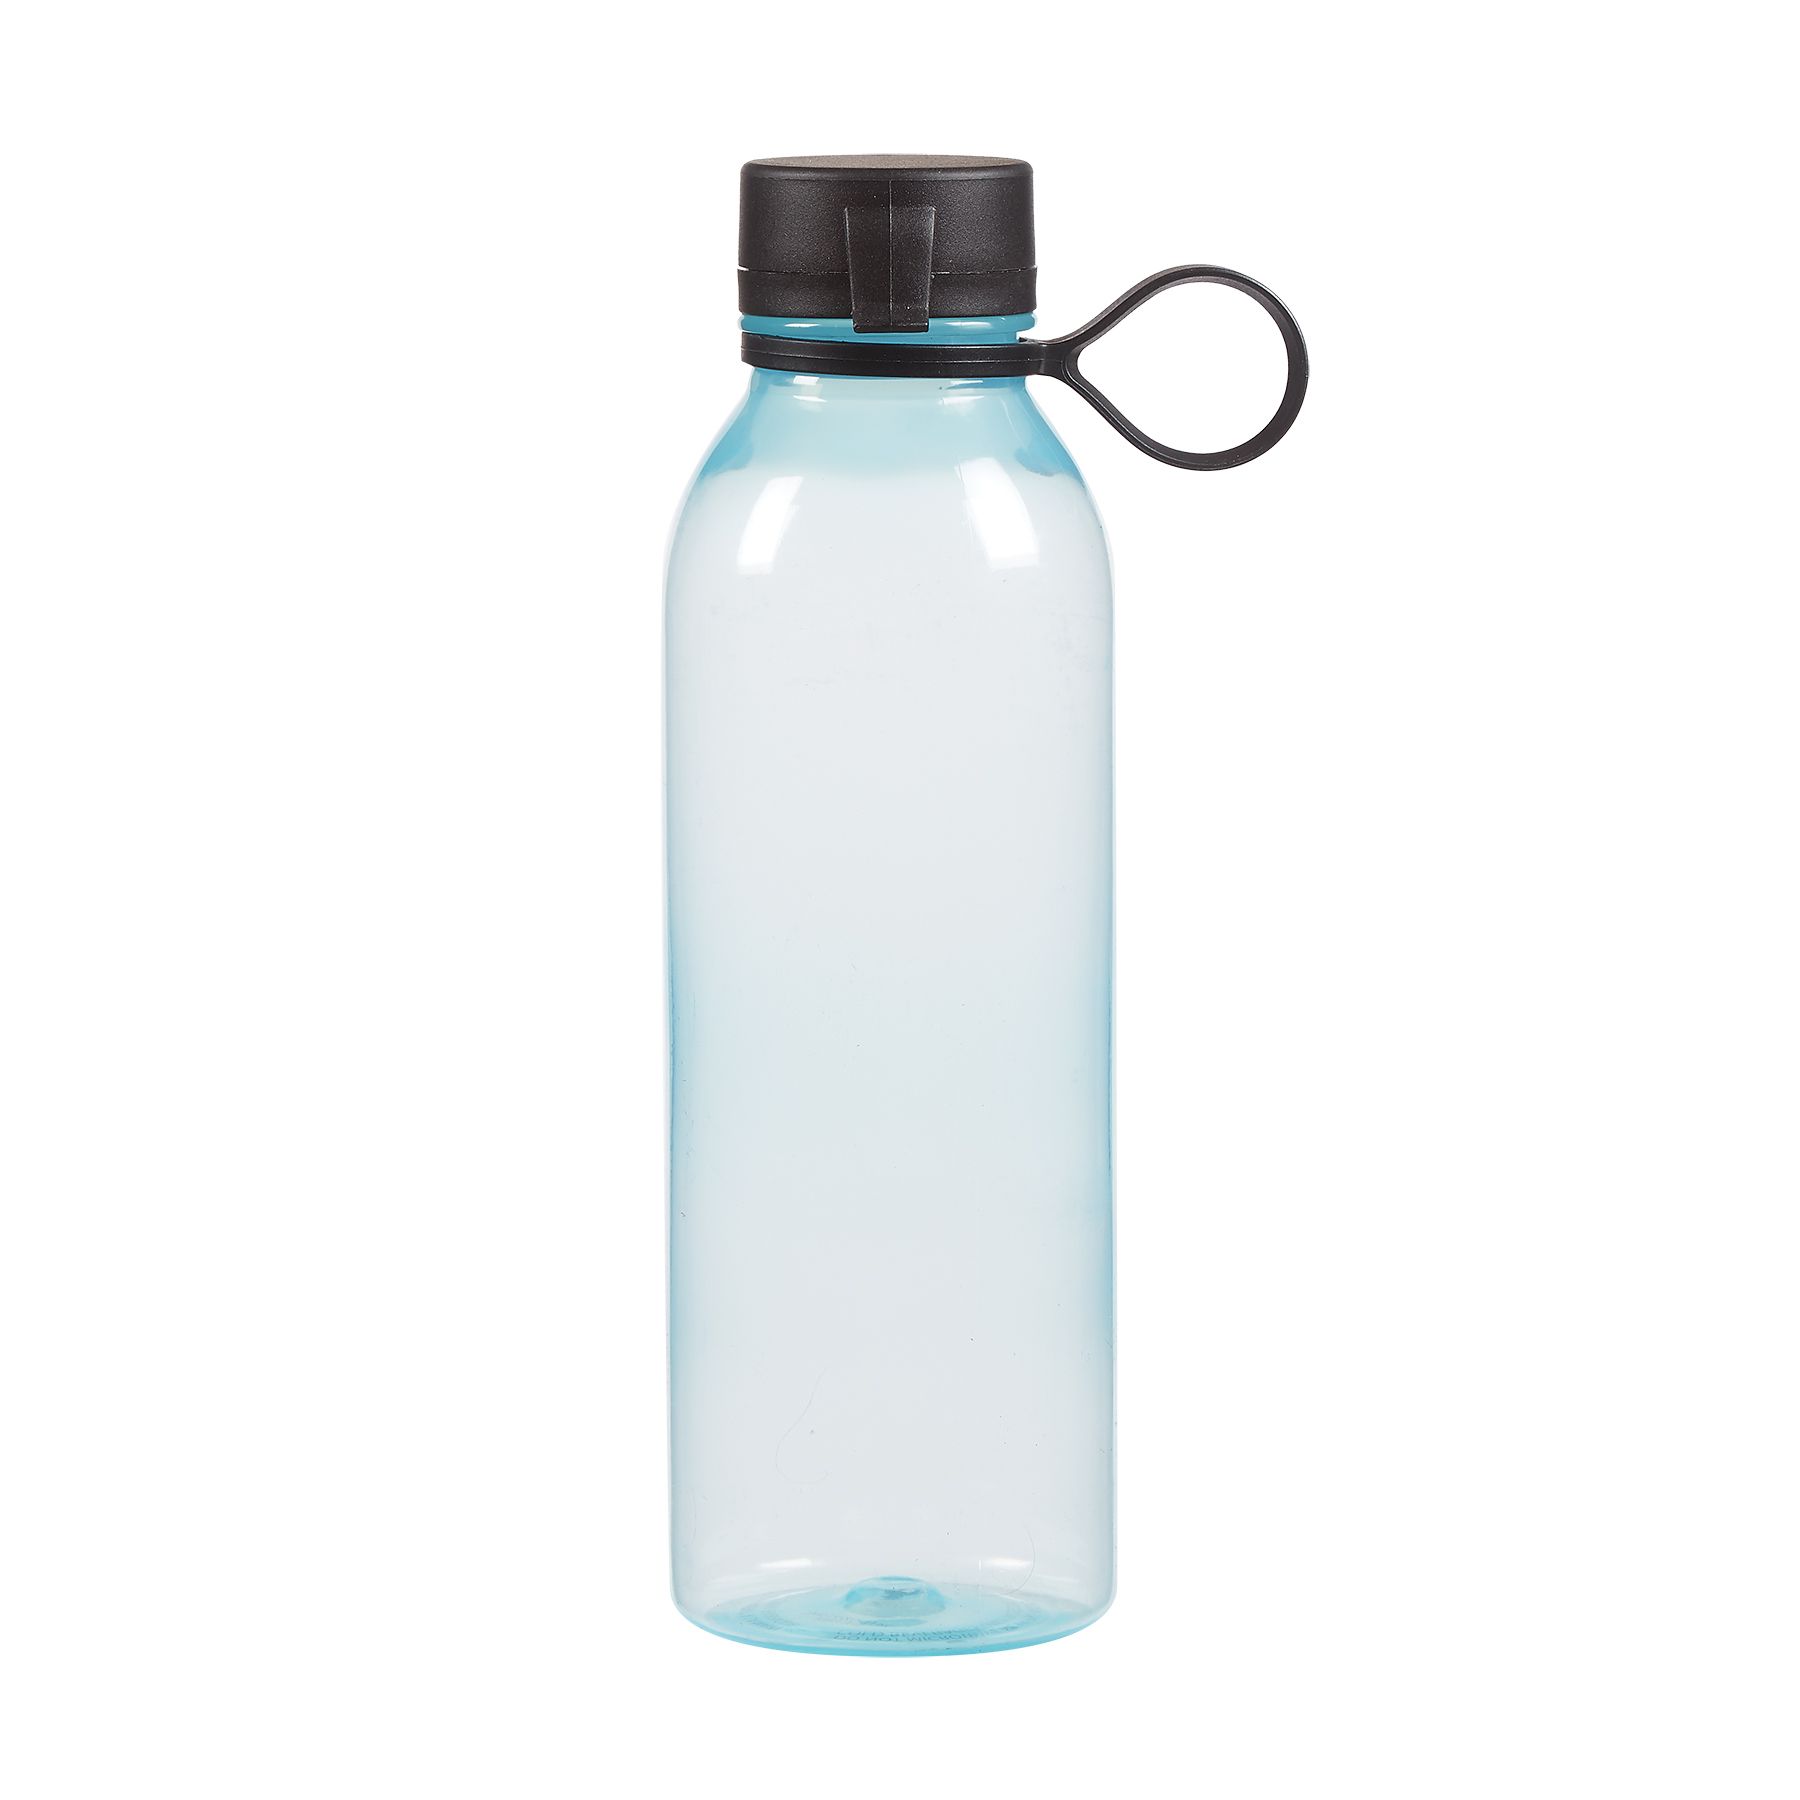 Imprinted Poly-Clear Plastic Water Bottle